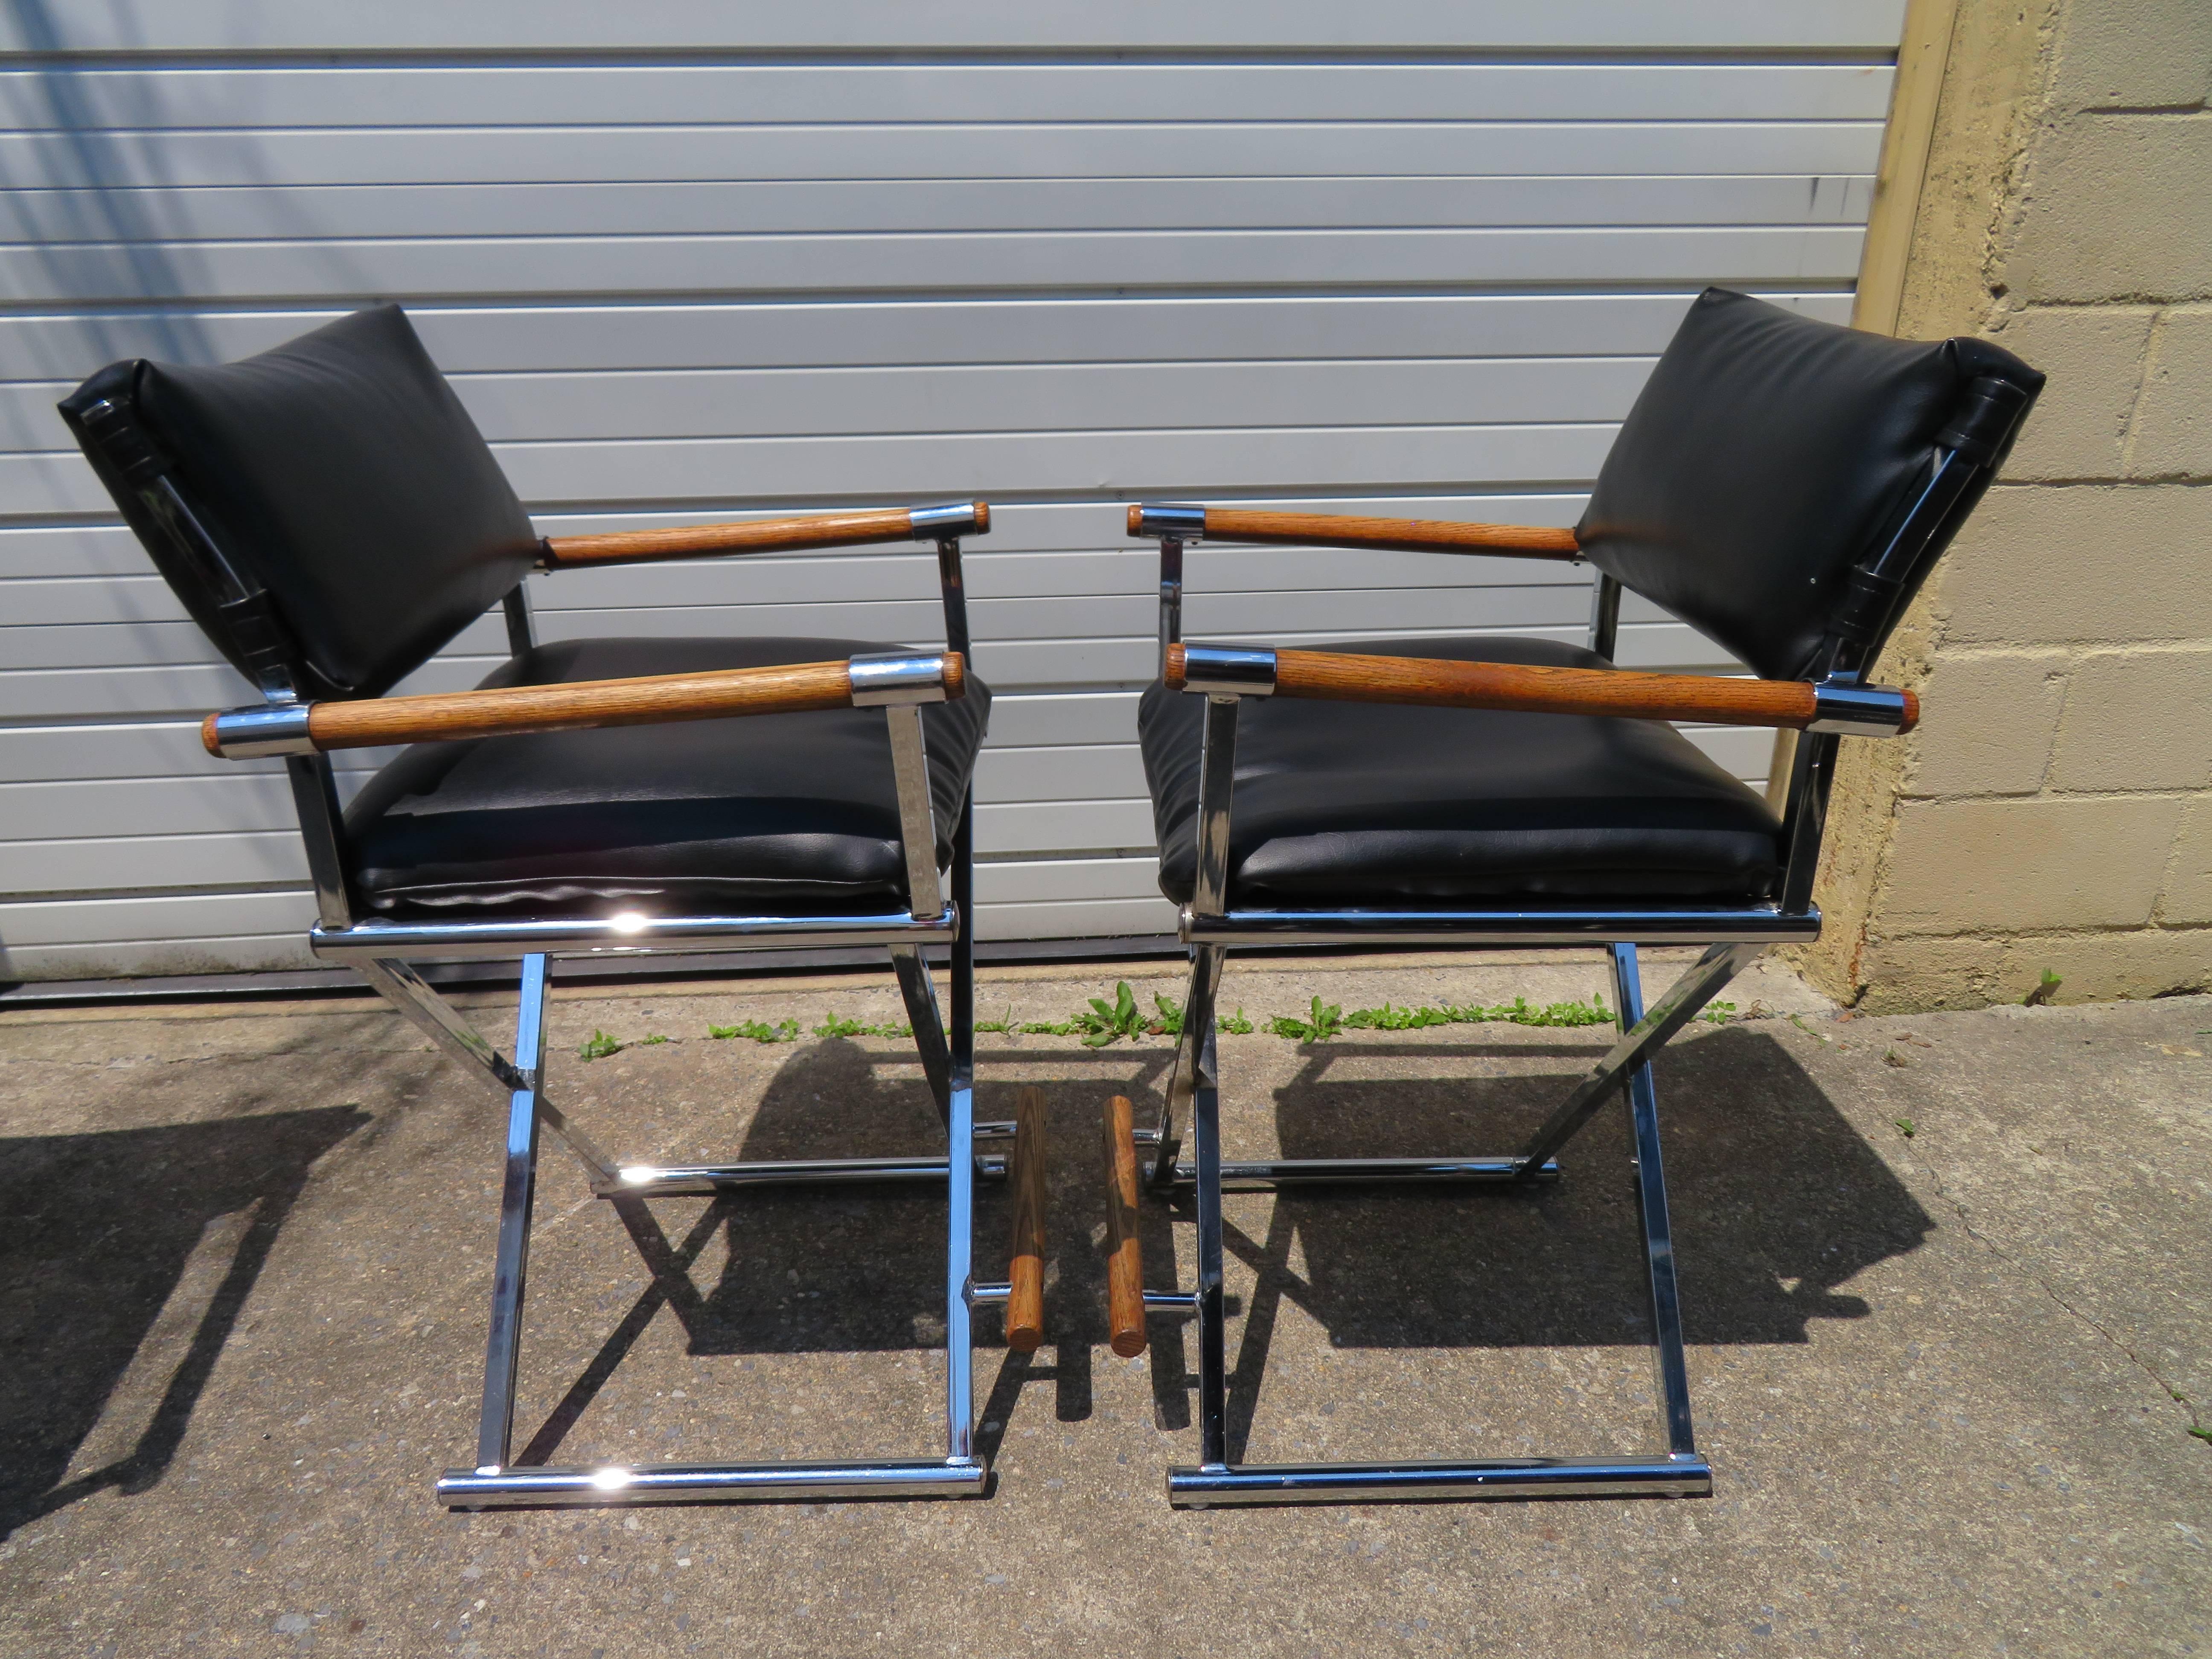 A vintage set of three director's chair bar stools in black faux leather with chrome X-base frames and wooden arm rests attributed to Milo Baughman. The seat height on these is 26.5